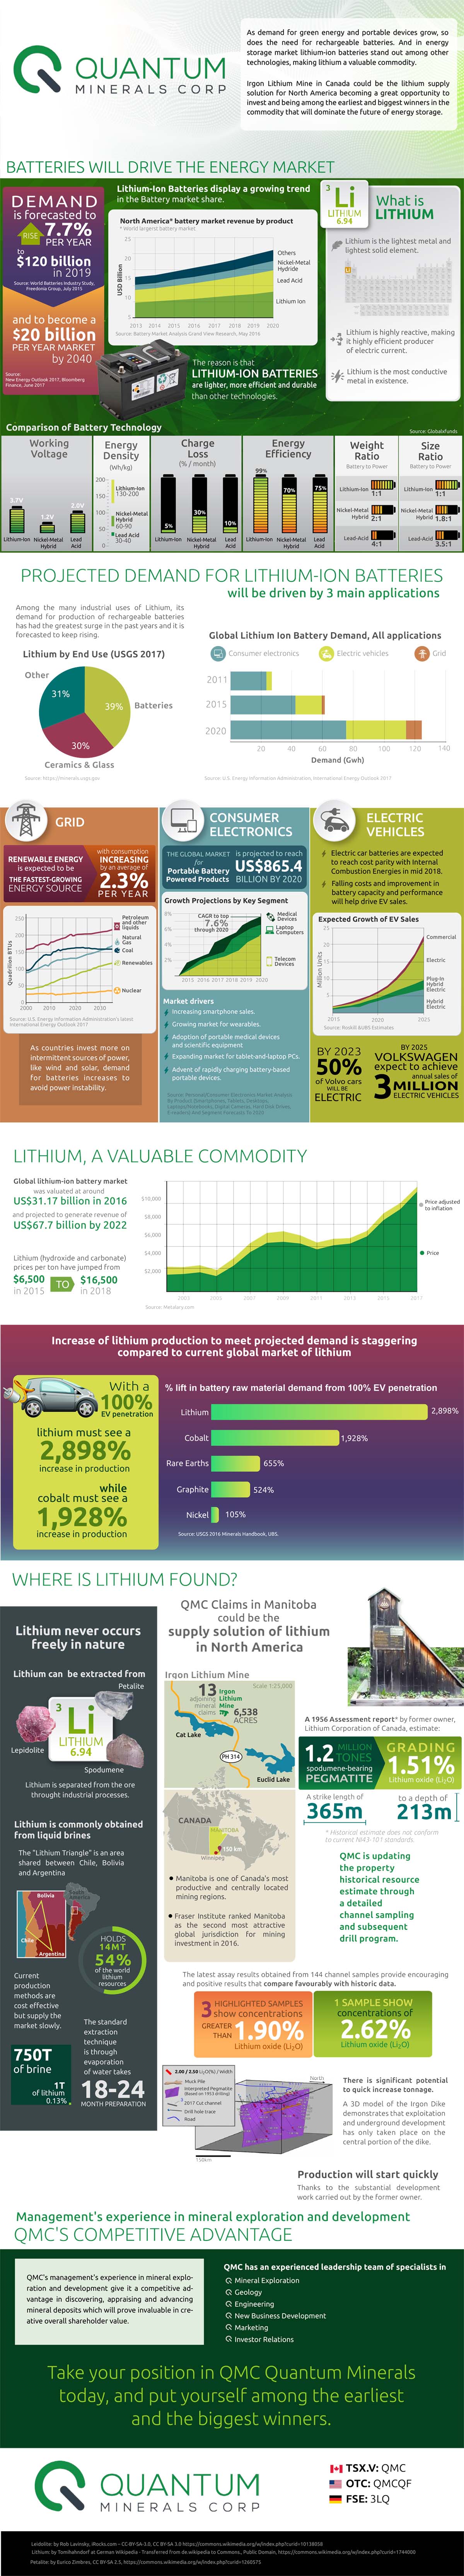 How Lithium Batteries Will Drive the Energy Market